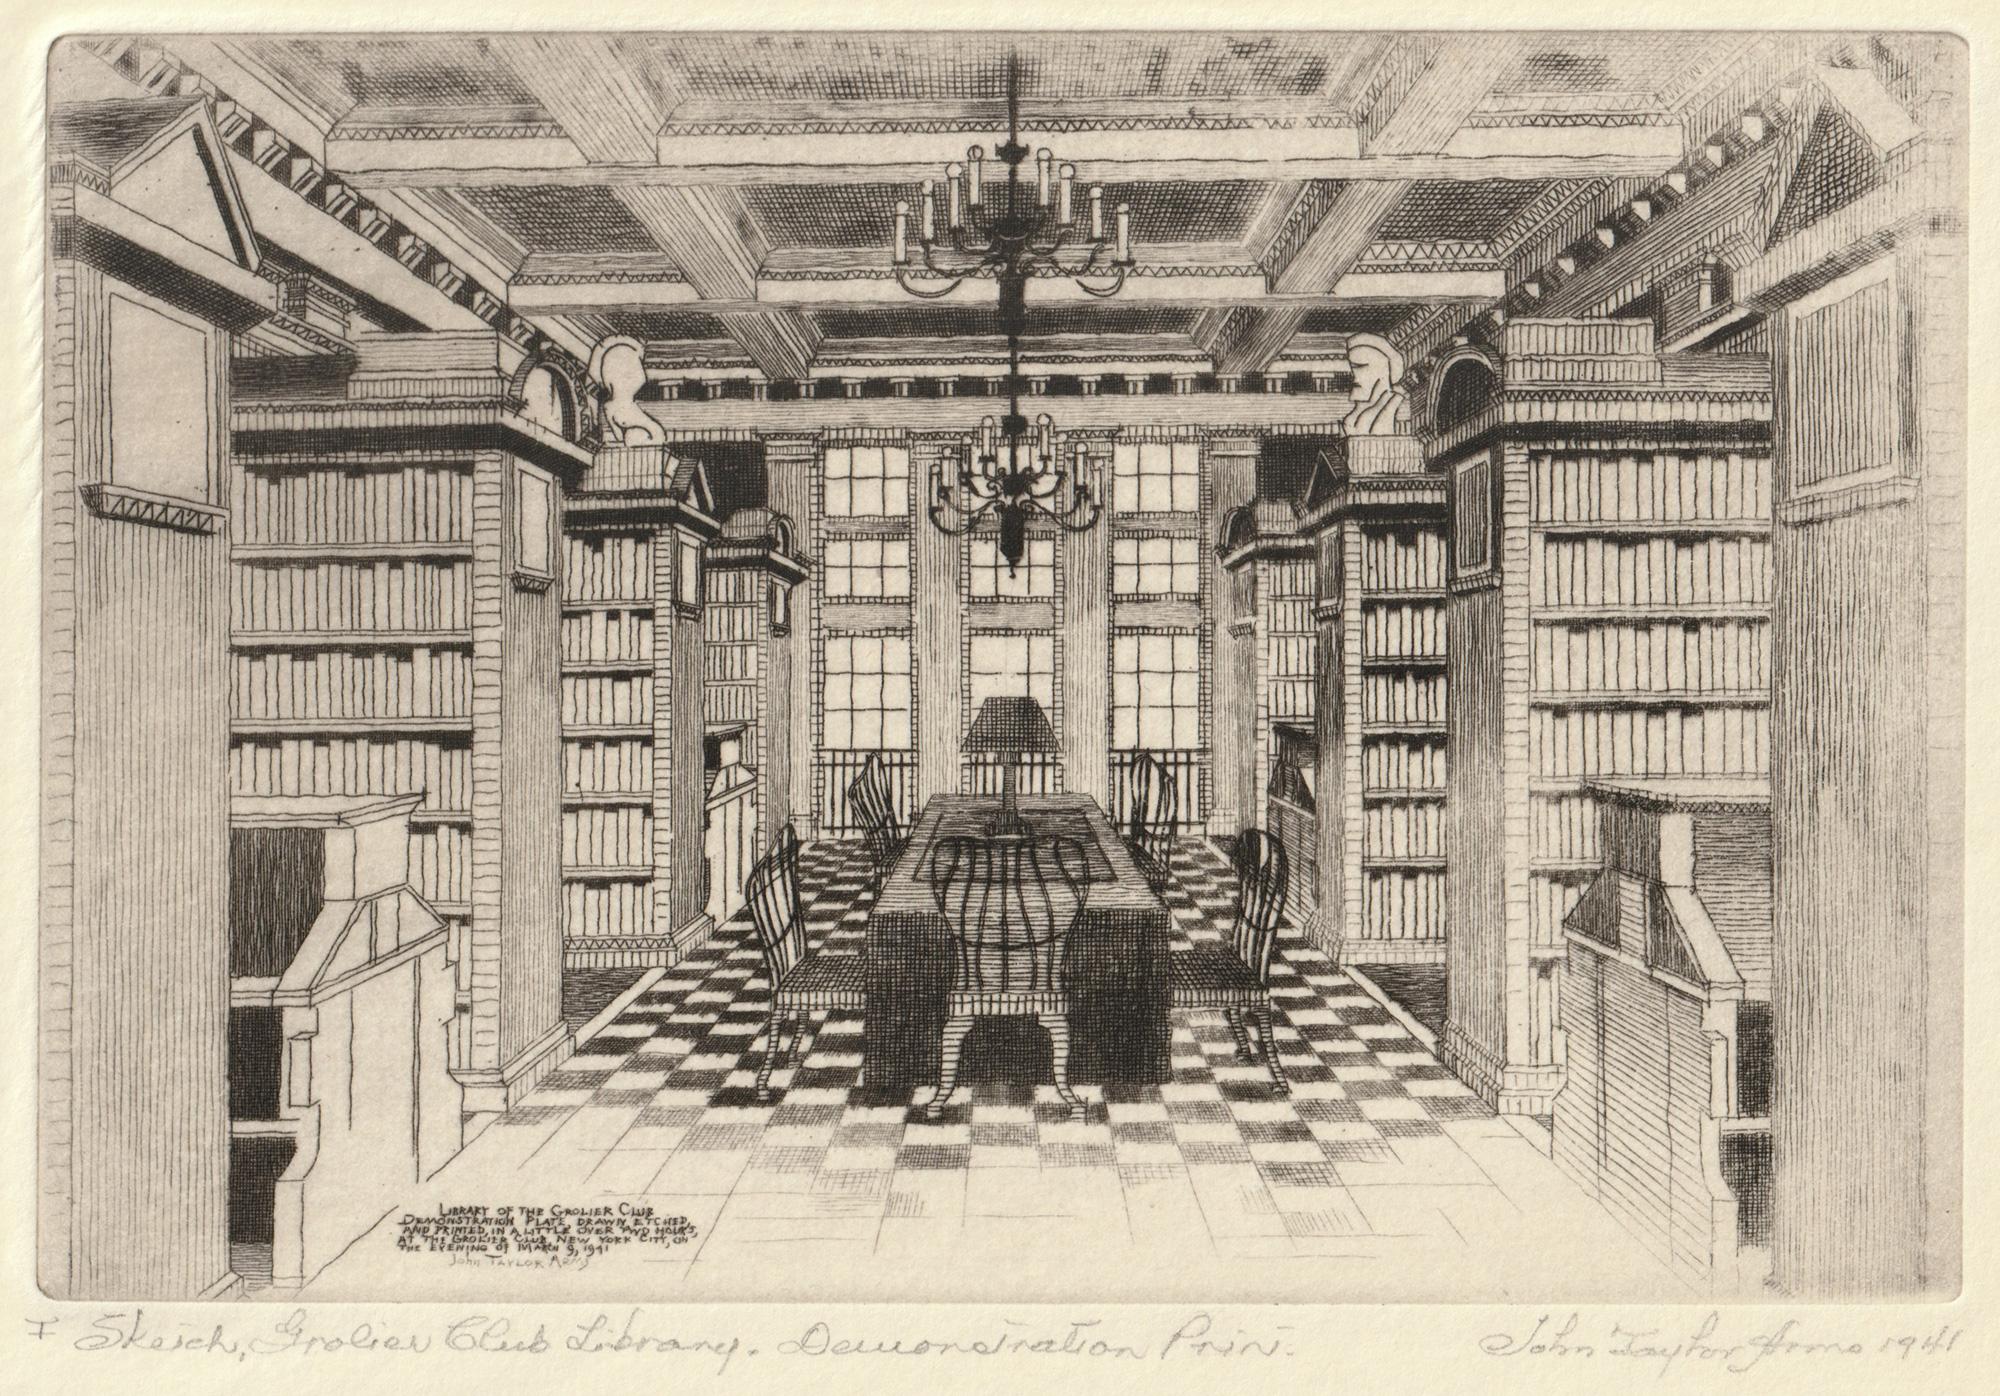 John Taylor Arms Figurative Print - The Grolier Club Library (Sketch), Demonstration Print